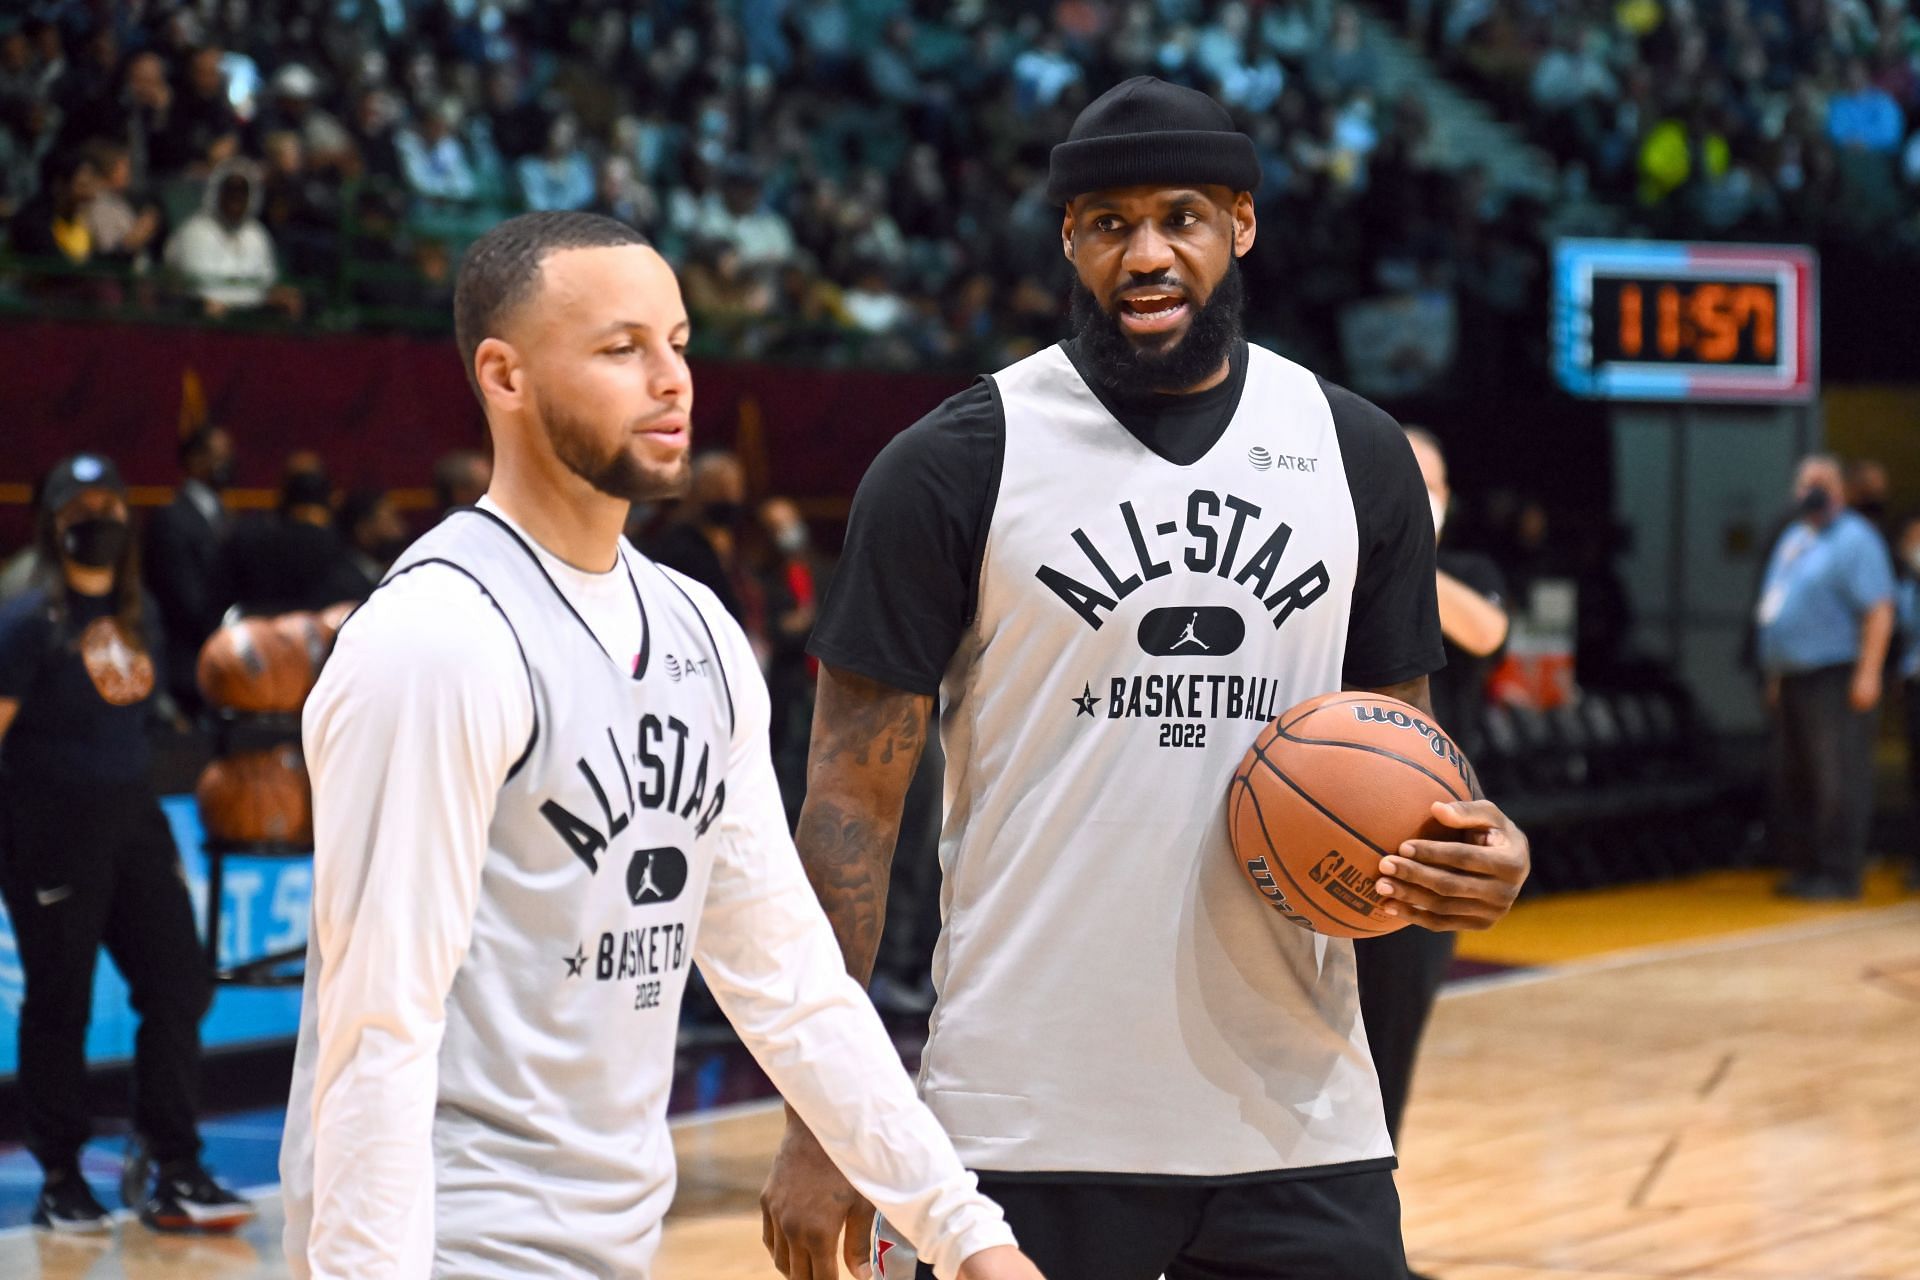 Steph Curry and LeBron James (right) at the 2022 NBA All-Star - Practice &amp; Media Availability.